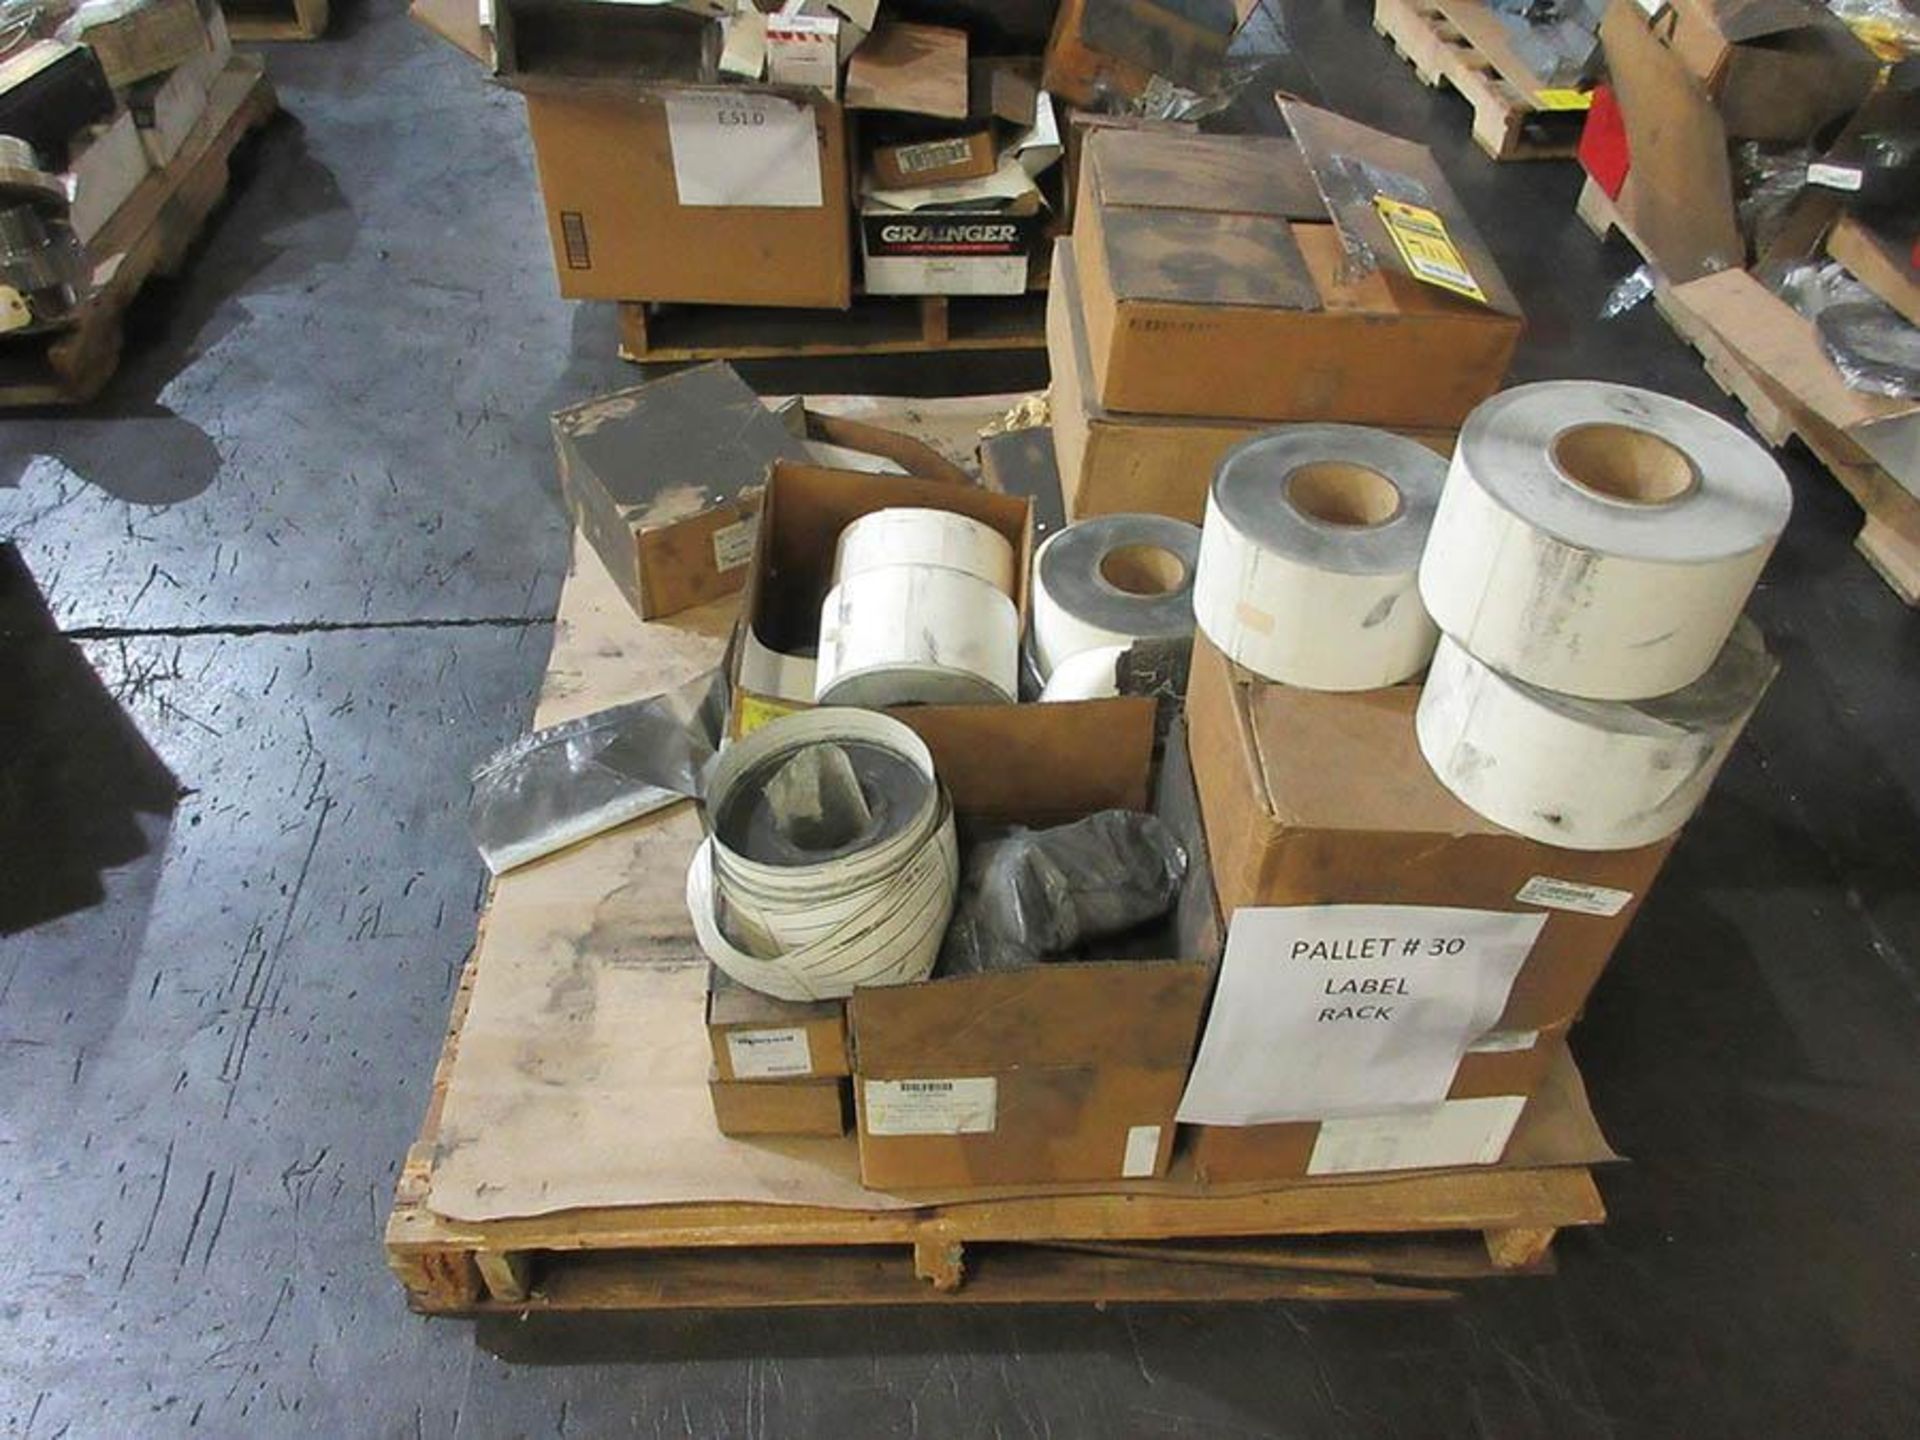 (4) PALLETS W/ LABELS, WIPING CLOTHS, FILTERS, TAPE, PAINT TRAYS AND MORE